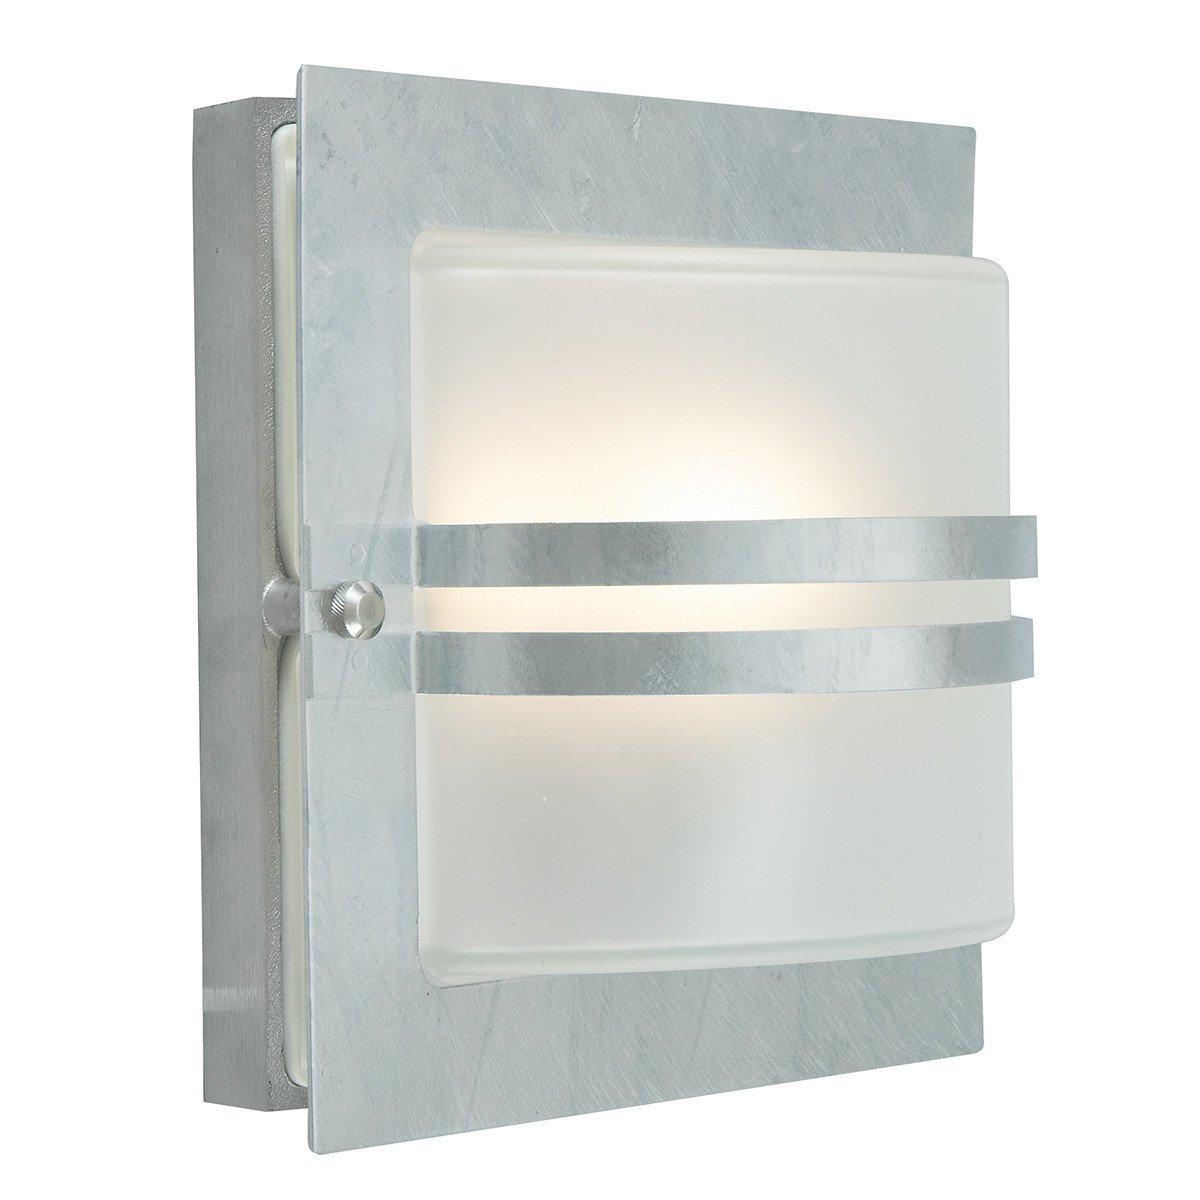 Bern 1 Light Outdoor Frosted Wall Light Galvanised IP65 E27